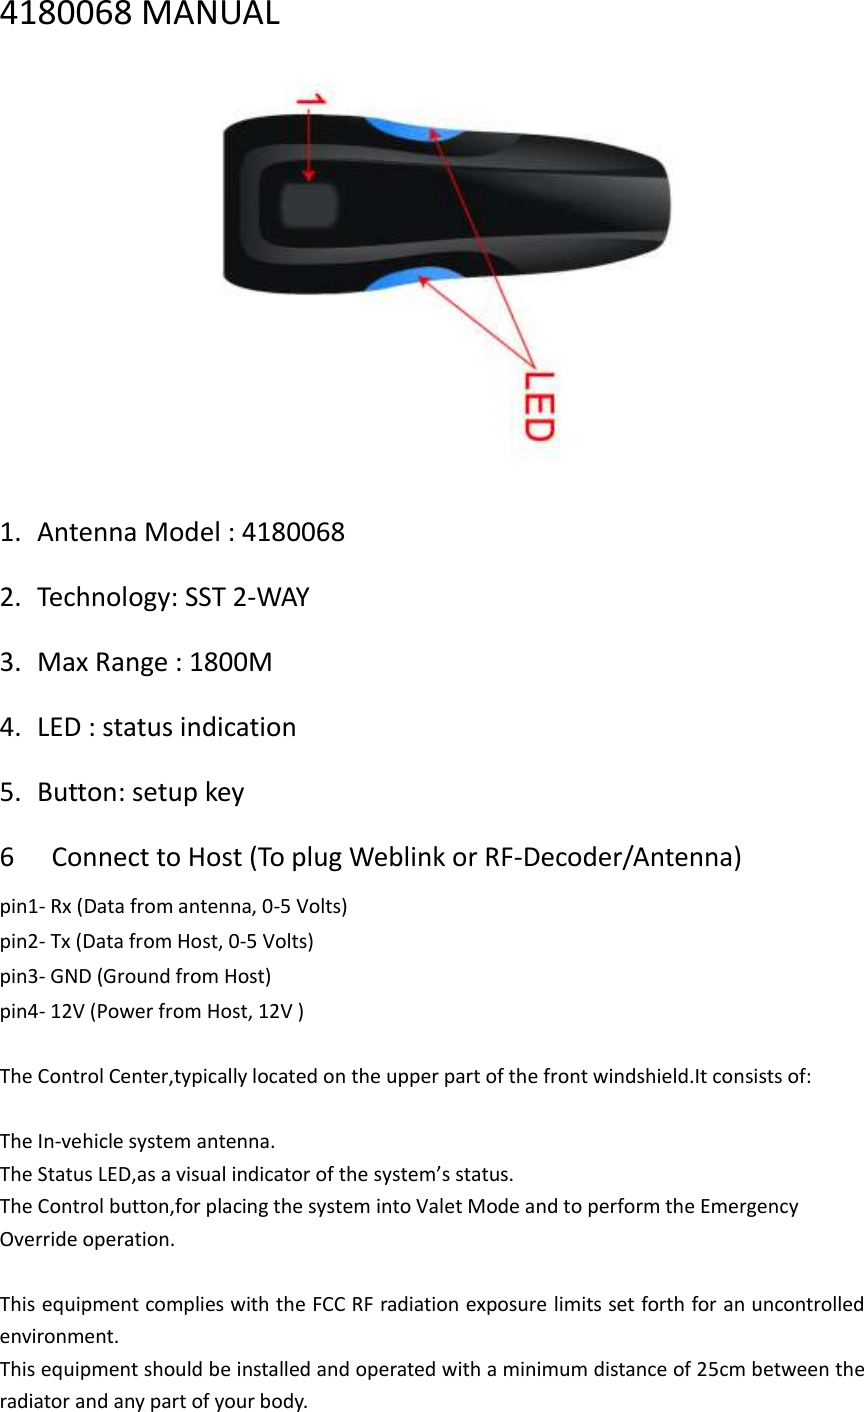 4180068 MANUAL  1. Antenna Model : 4180068 2. Technology: SST 2-WAY 3. Max Range : 1800M 4. LED : status indication 5. Button: setup key 6   Connect to Host (To plug Weblink or RF-Decoder/Antenna)   pin1- Rx (Data from antenna, 0-5 Volts)   pin2- Tx (Data from Host, 0-5 Volts)   pin3- GND (Ground from Host)   pin4- 12V (Power from Host, 12V )    The Control Center,typically located on the upper part of the front windshield.It consists of:  The In-vehicle system antenna. The Status LED,as a visual indicator of the system’s status. The Control button,for placing the system into Valet Mode and to perform the Emergency Override operation.  This equipment complies with the FCC RF radiation exposure limits set forth for an uncontrolled environment.   This equipment should be installed and operated with a minimum distance of 25cm between the radiator and any part of your body. 